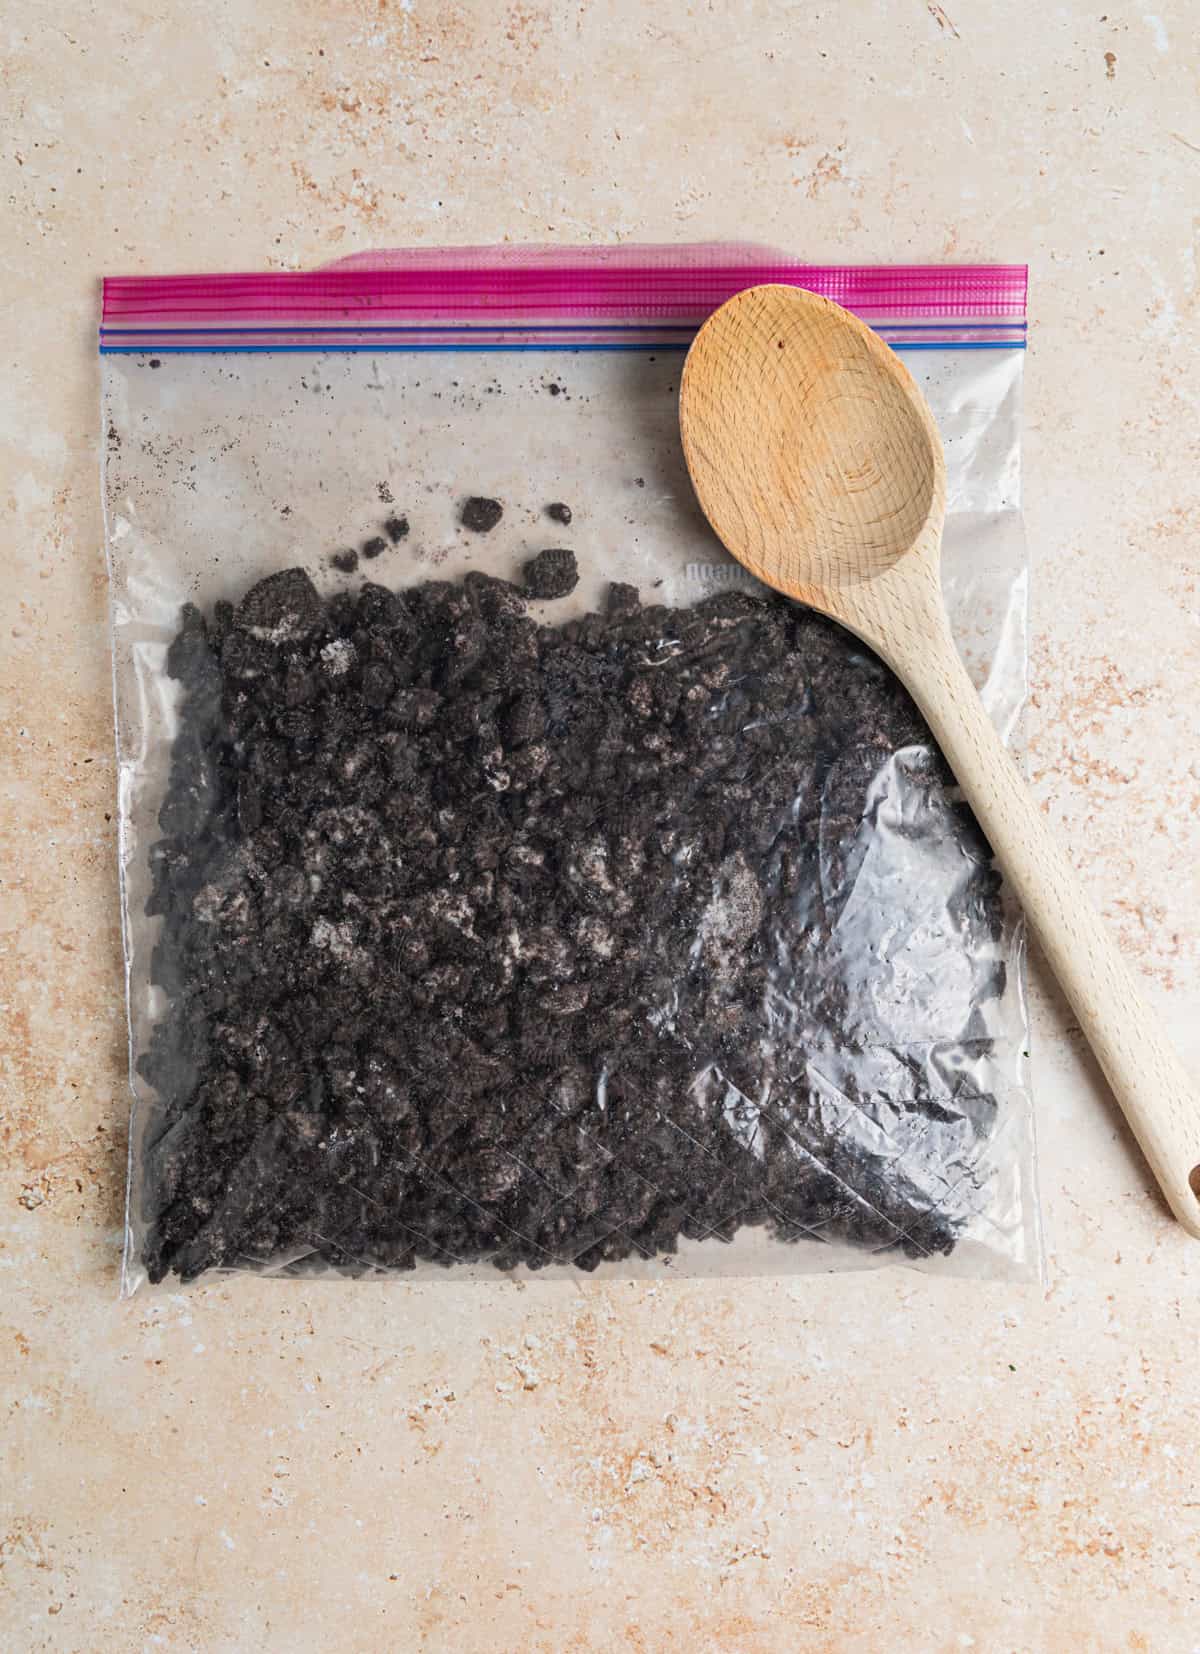 Crushed Oreos in plastic bag with wooden spoon set on top.